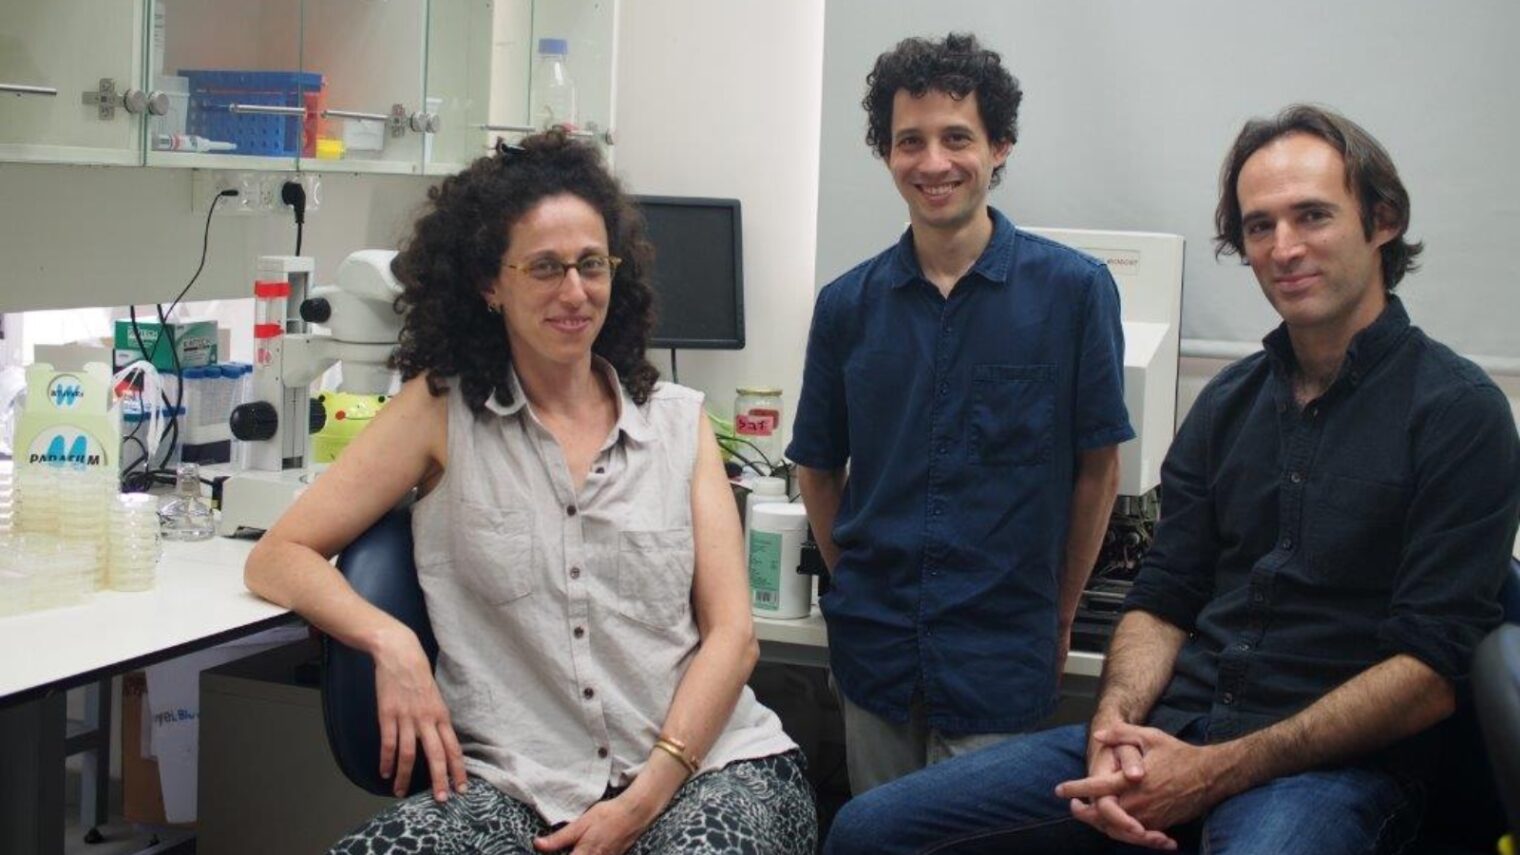 TAU researchers, from left, Rachel Posner, Itai A. Toker and Prof. Oded Rechavi. Photo courtesy of Tel Aviv University